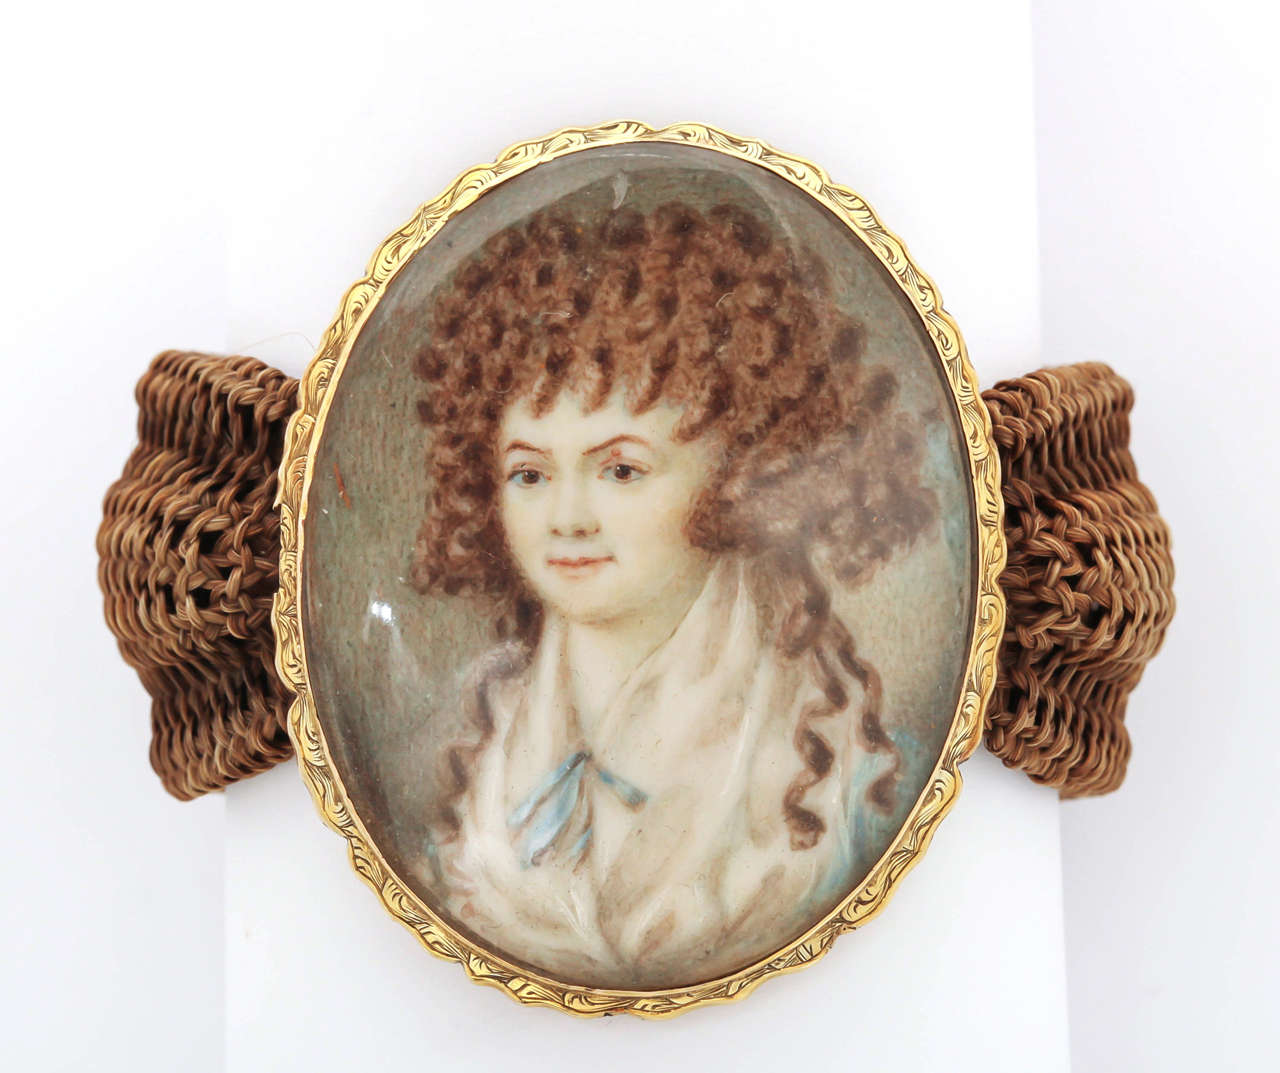 One of the most compelling 18th century is this young ginger haired girl with voluminous red curls. The parchment miniature is set in 18kt gold. Her features are fine, her eyes full of life and her smile innocent. Demurely attired as a young lady of